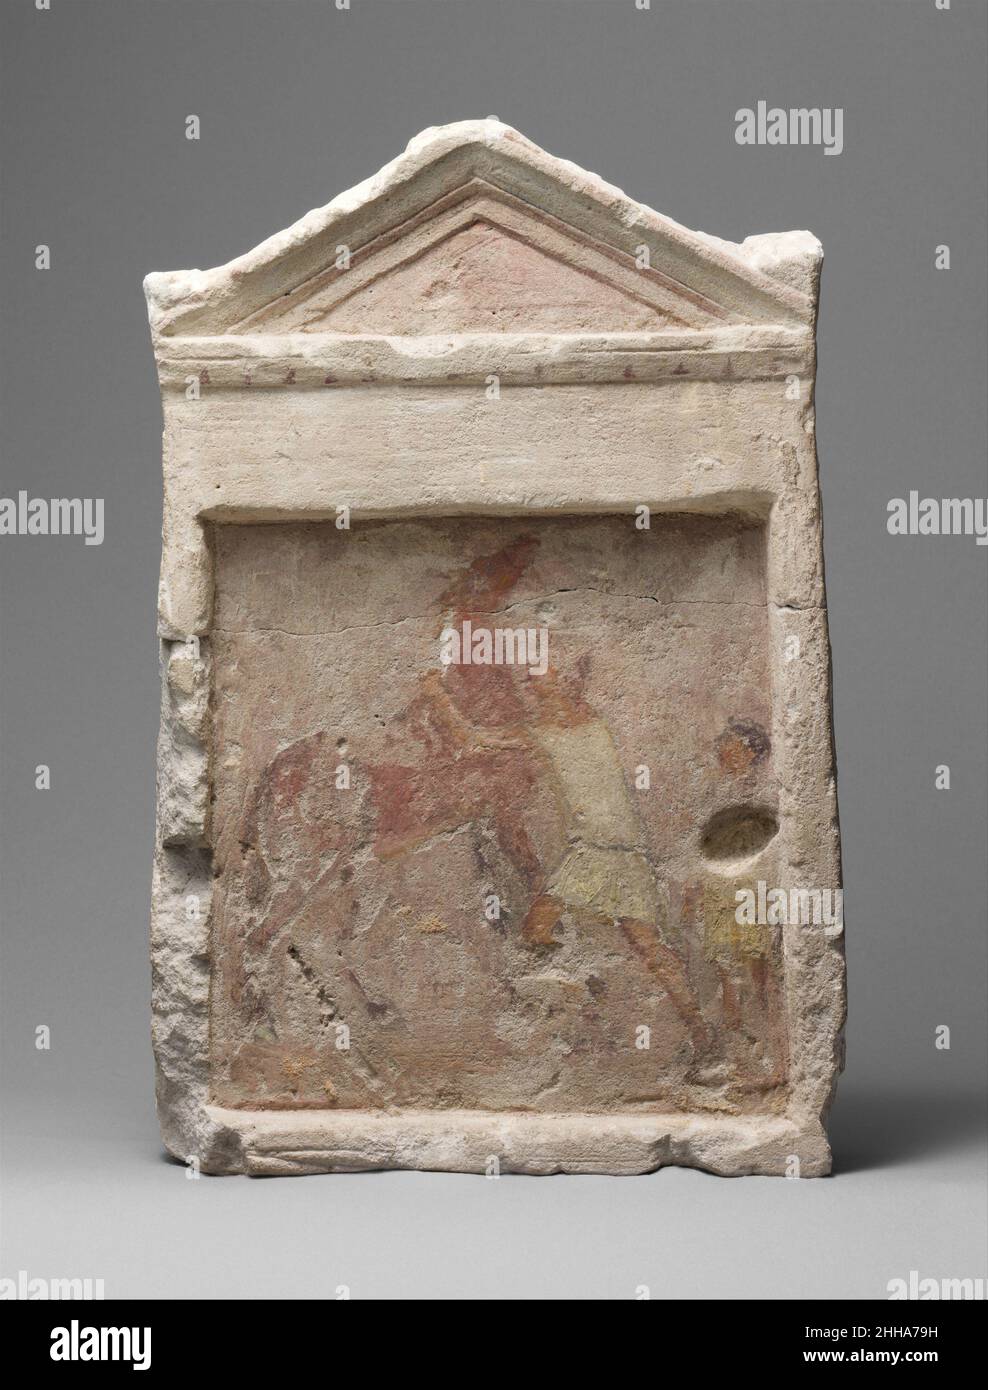 Painted limestone funerary slab with a man controlling a rearing horse 2nd half of 3rd century B.C. Greek During the Ptolemaic period a distinctive type of subterranean tomb for multiple burials proliferated in the cemeteries around the city of Alexandria. Underground chambers cut into the living rock radiated from a central courtyard open to the sky. Most chambers contained a number of loculi, long narrow niches cut into the walls, which served as burial slots. Some loculi were sealed with painted limestone slabs in the form of small shrines. Here, a lively depiction of a man trying to bridle Stock Photo